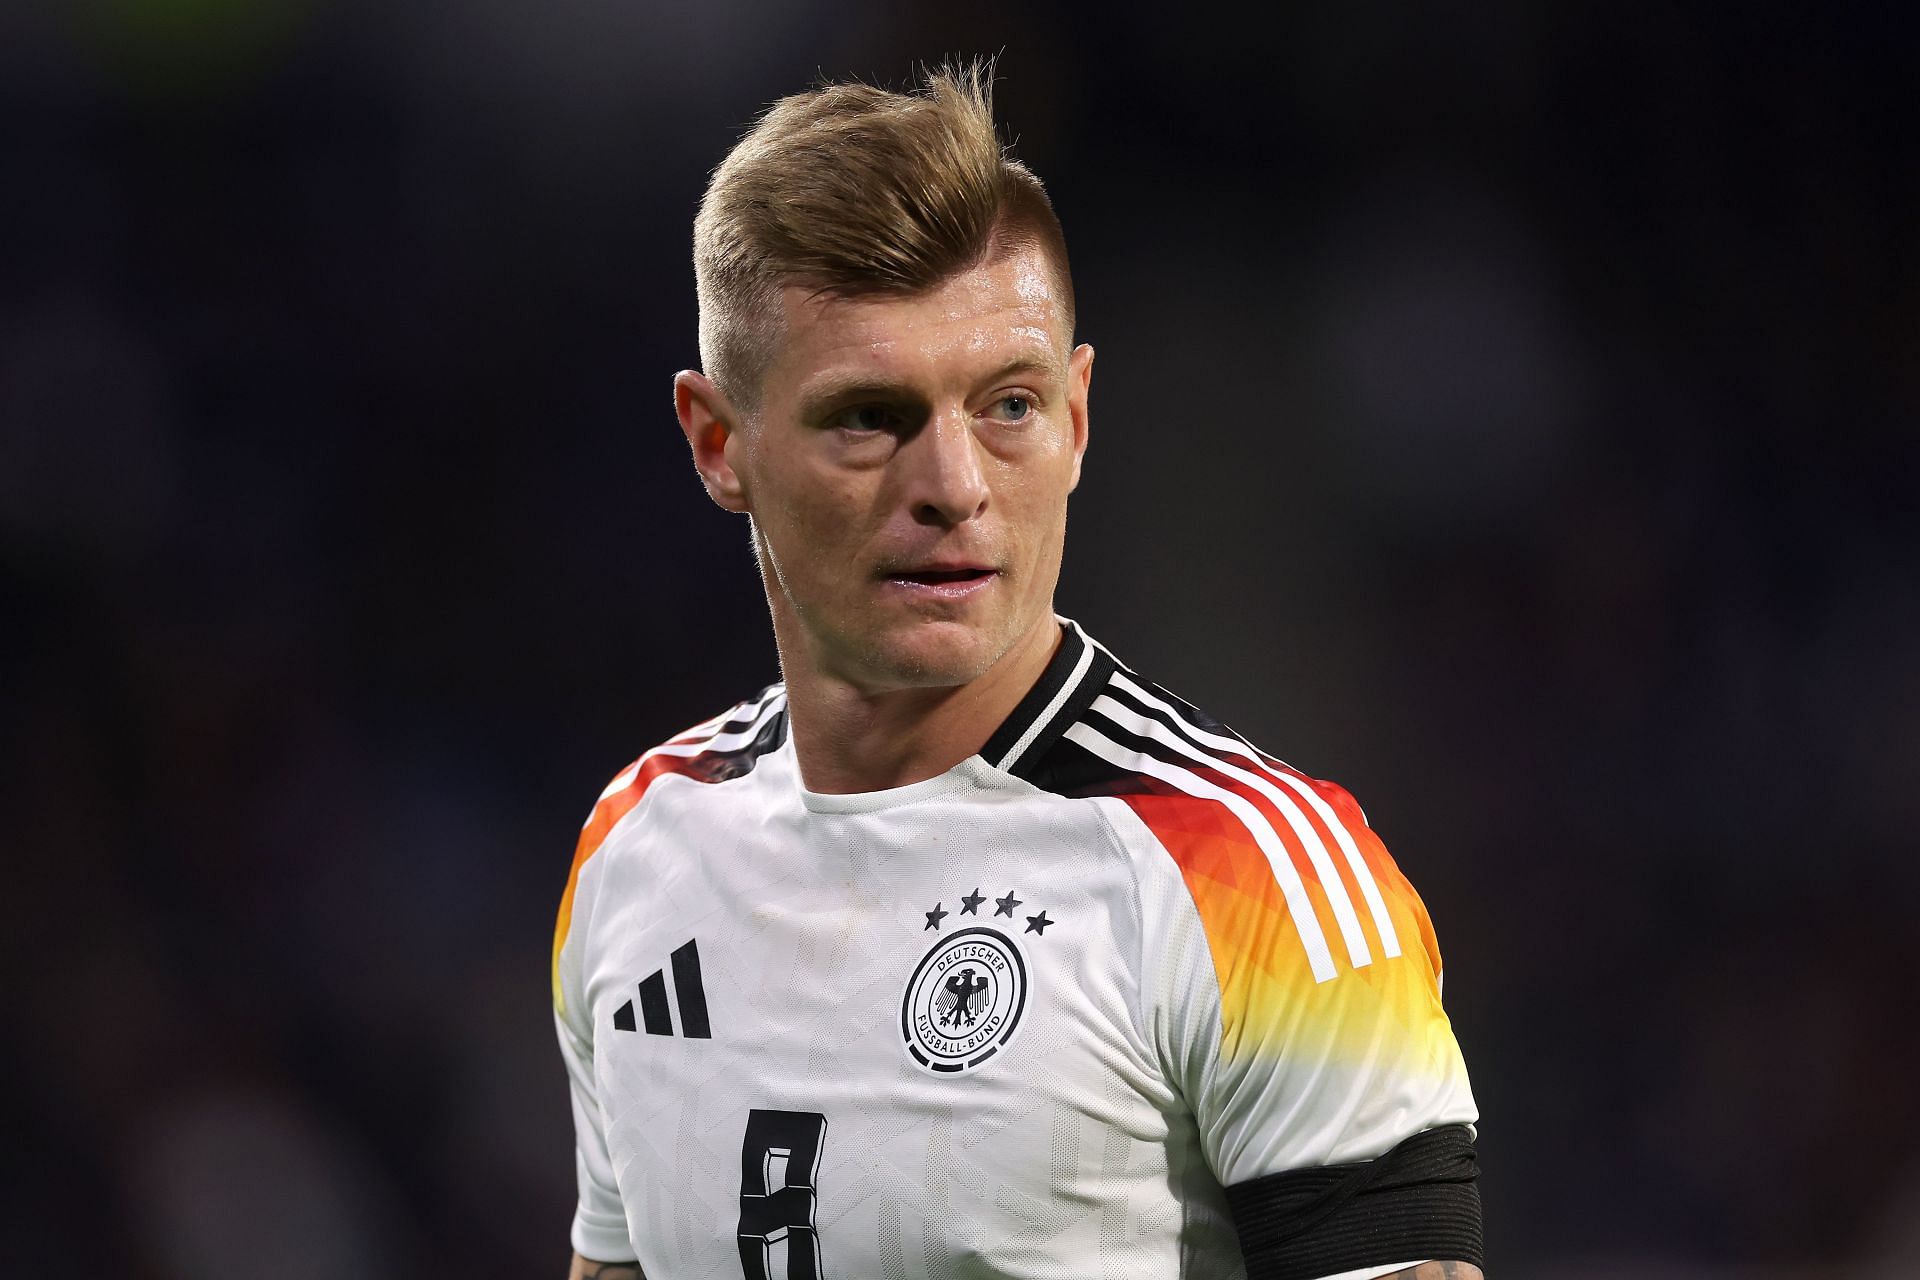 Toni Kroos stole the show on his return to international football.